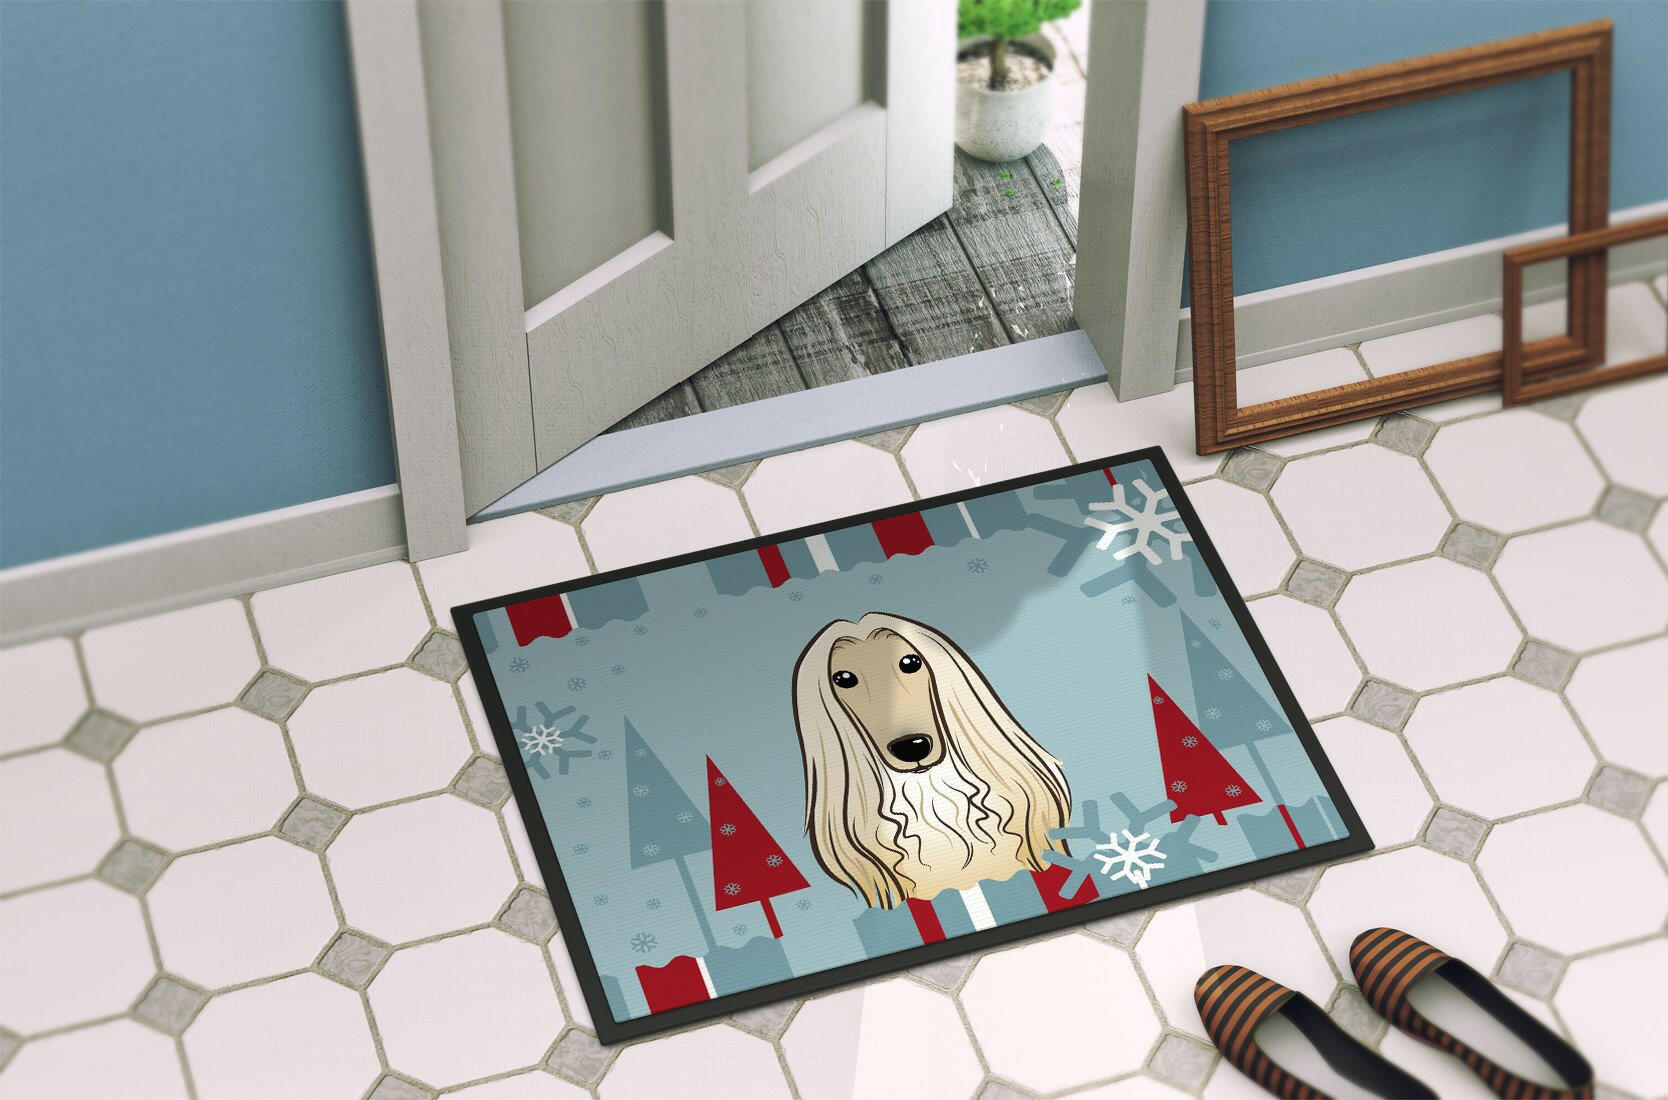 Winter Holiday Afghan Hound Indoor or Outdoor Mat 18x27 BB1740MAT - the-store.com